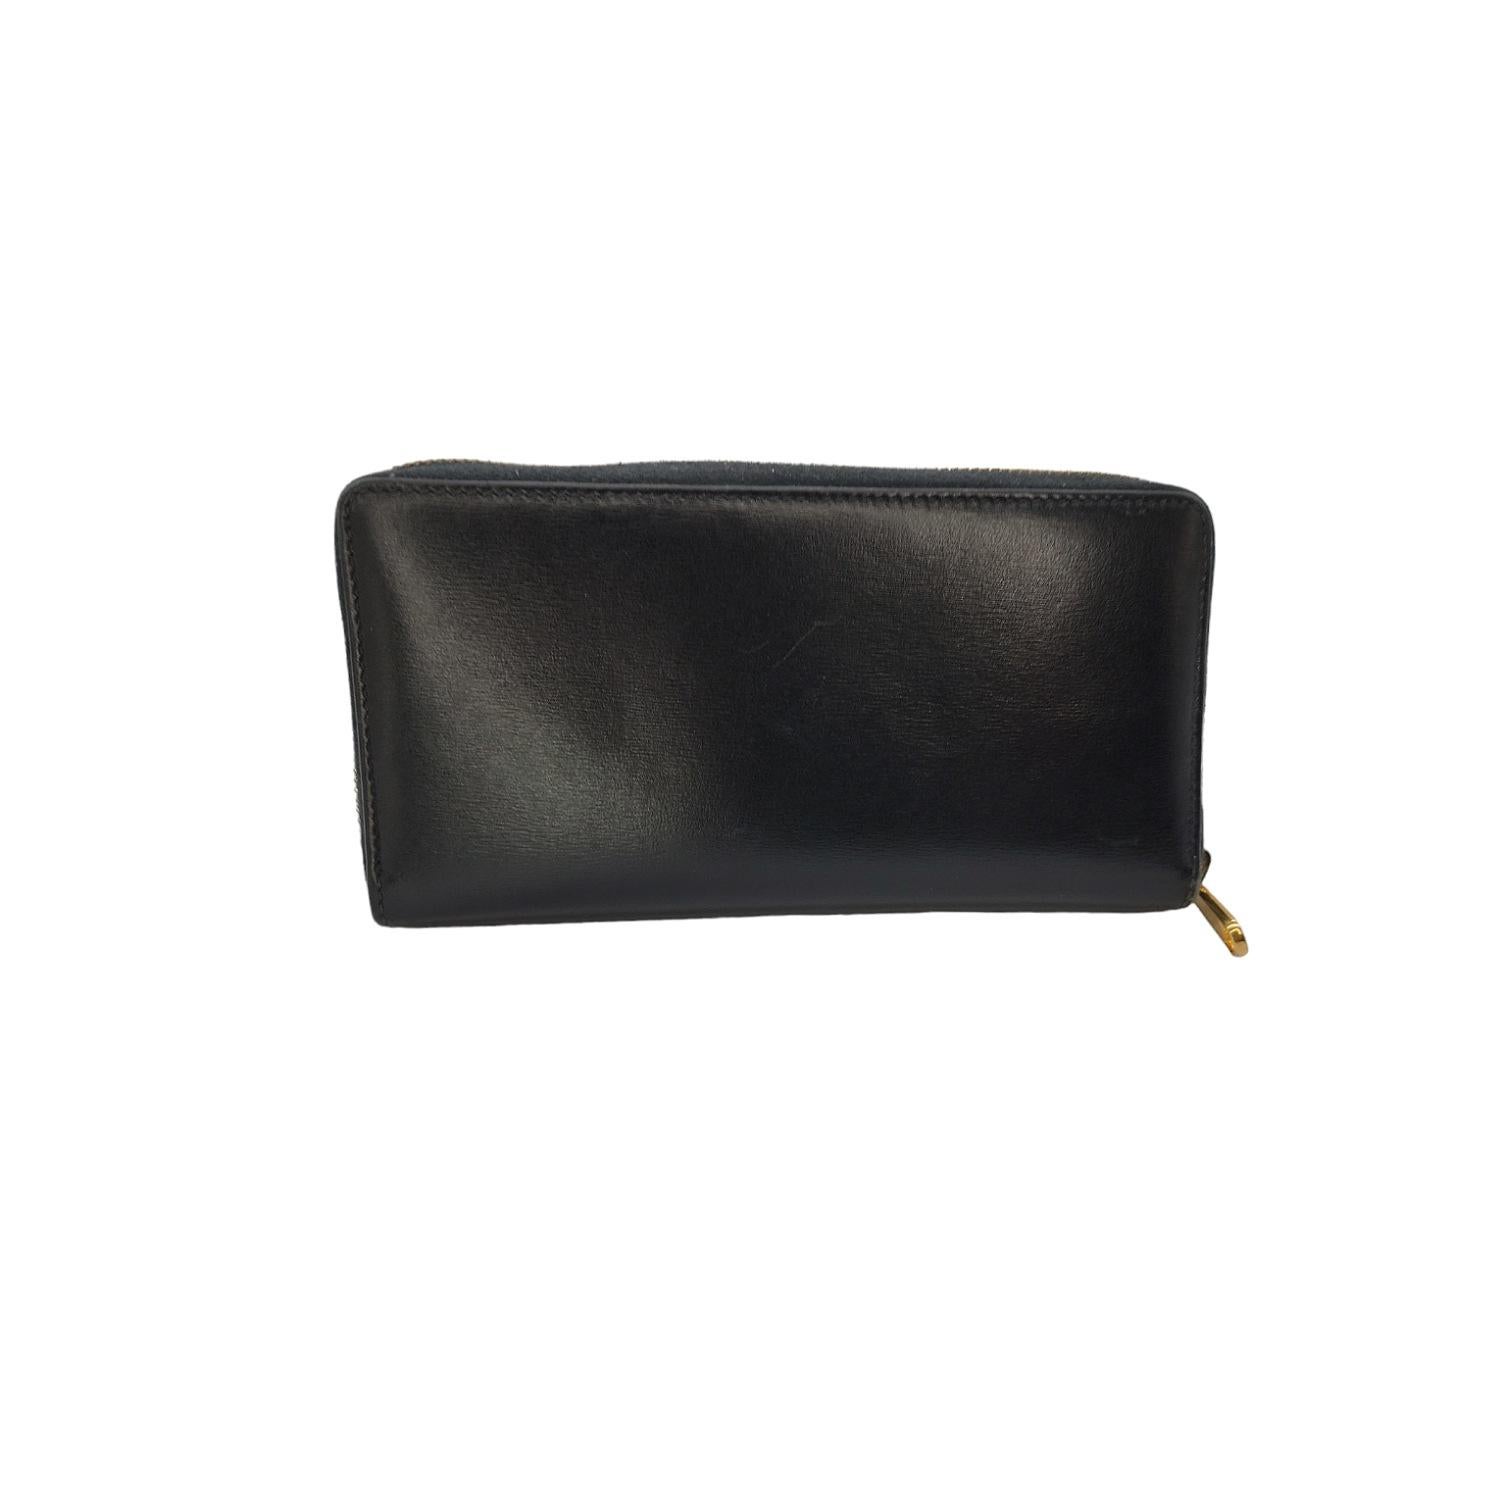 This stylish wallet is crafted of smooth leather in black with a 3/4 wrap around zipper that opens to a leather and fabric interior with plenty card slots, compartments, and pockets. The horsebit design is an iconic detail that is part of Gucci's